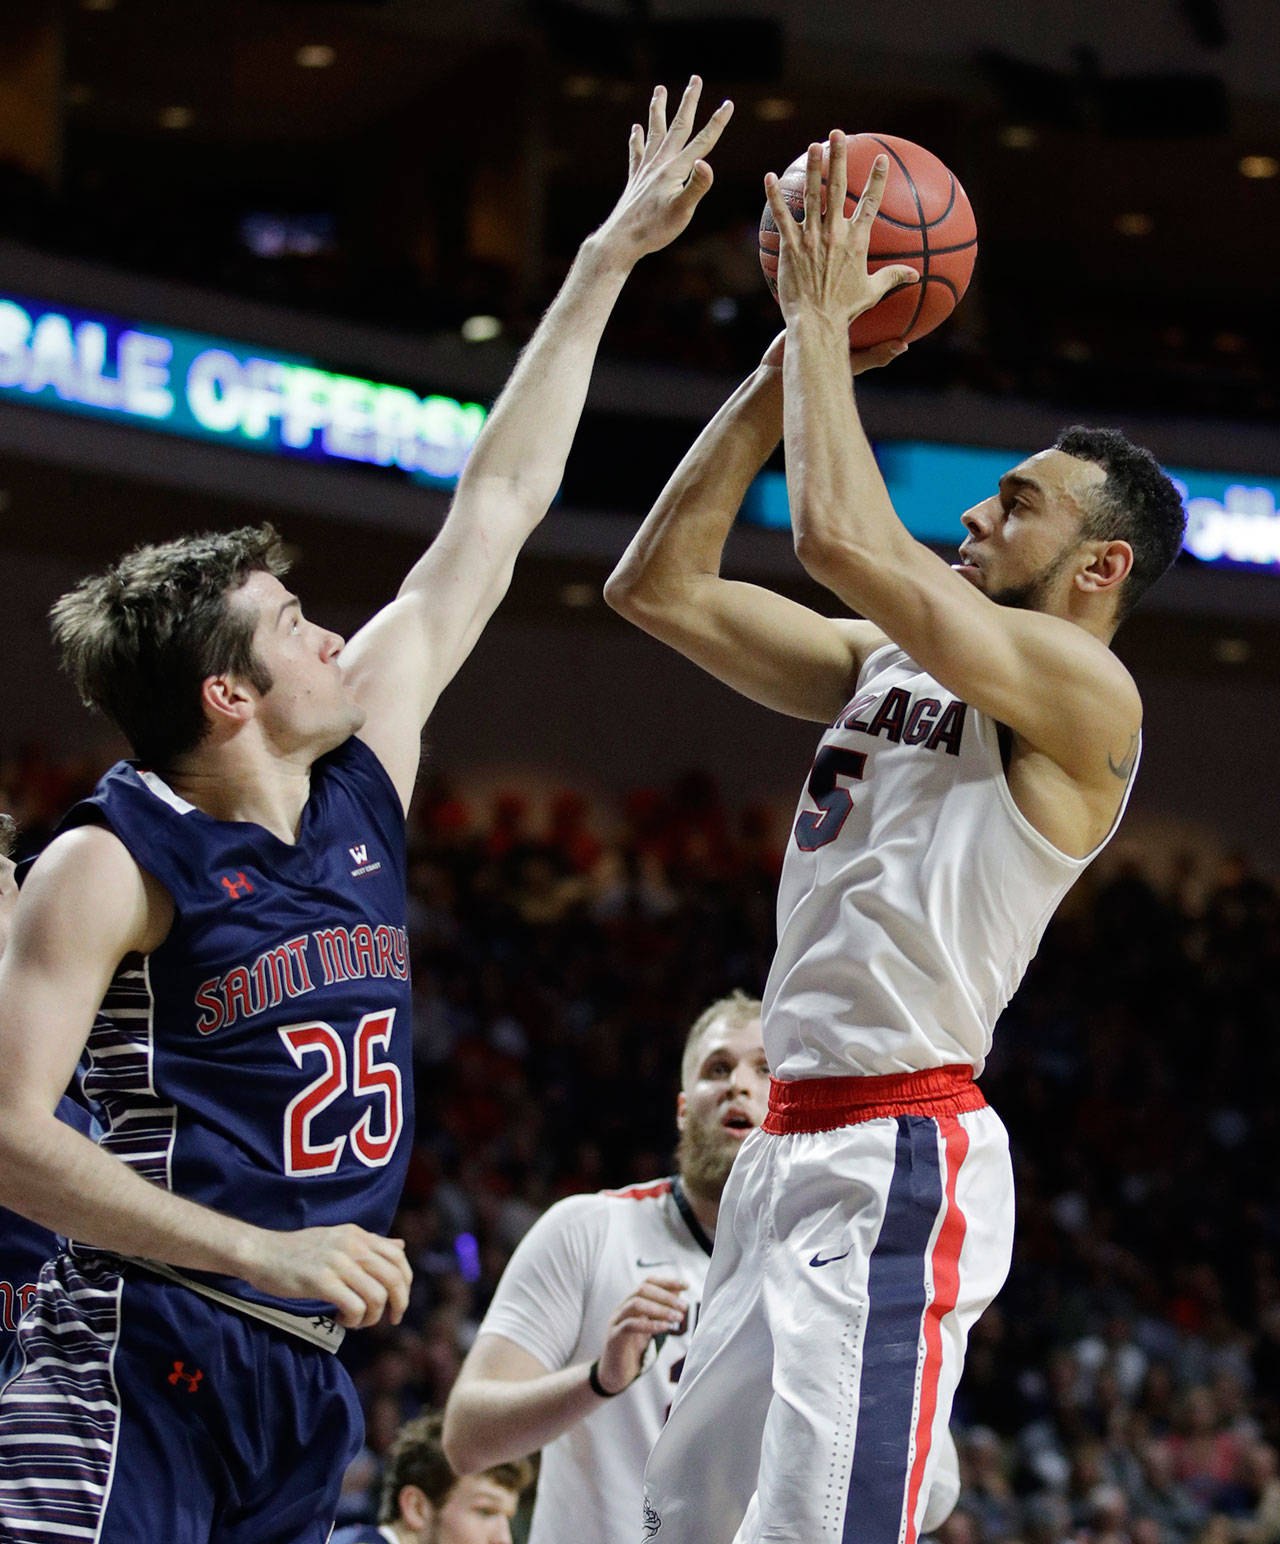 Gonzaga’s Nigel Williams-Goss shoots over Saint Mary’s Joe Rahon in the first half of the championship of the West Coast Conference tournament on March 7, 2017, in Las Vegas. (AP Photo/John Locher)